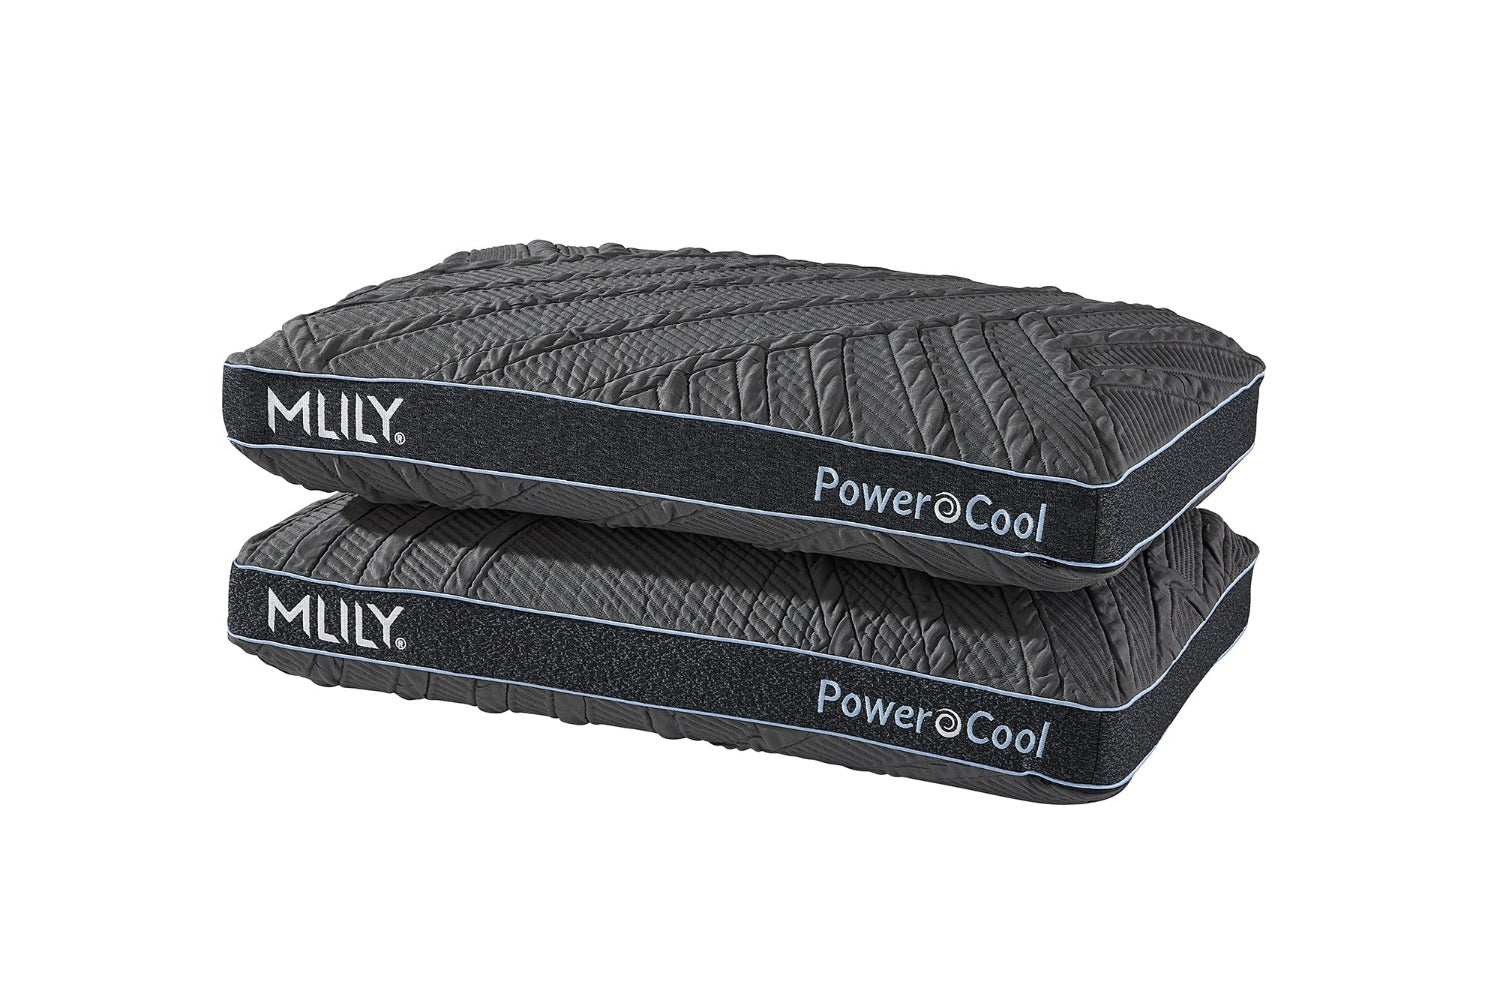 MLILY PowerCool Pillow at Luxurious Beds and Linens